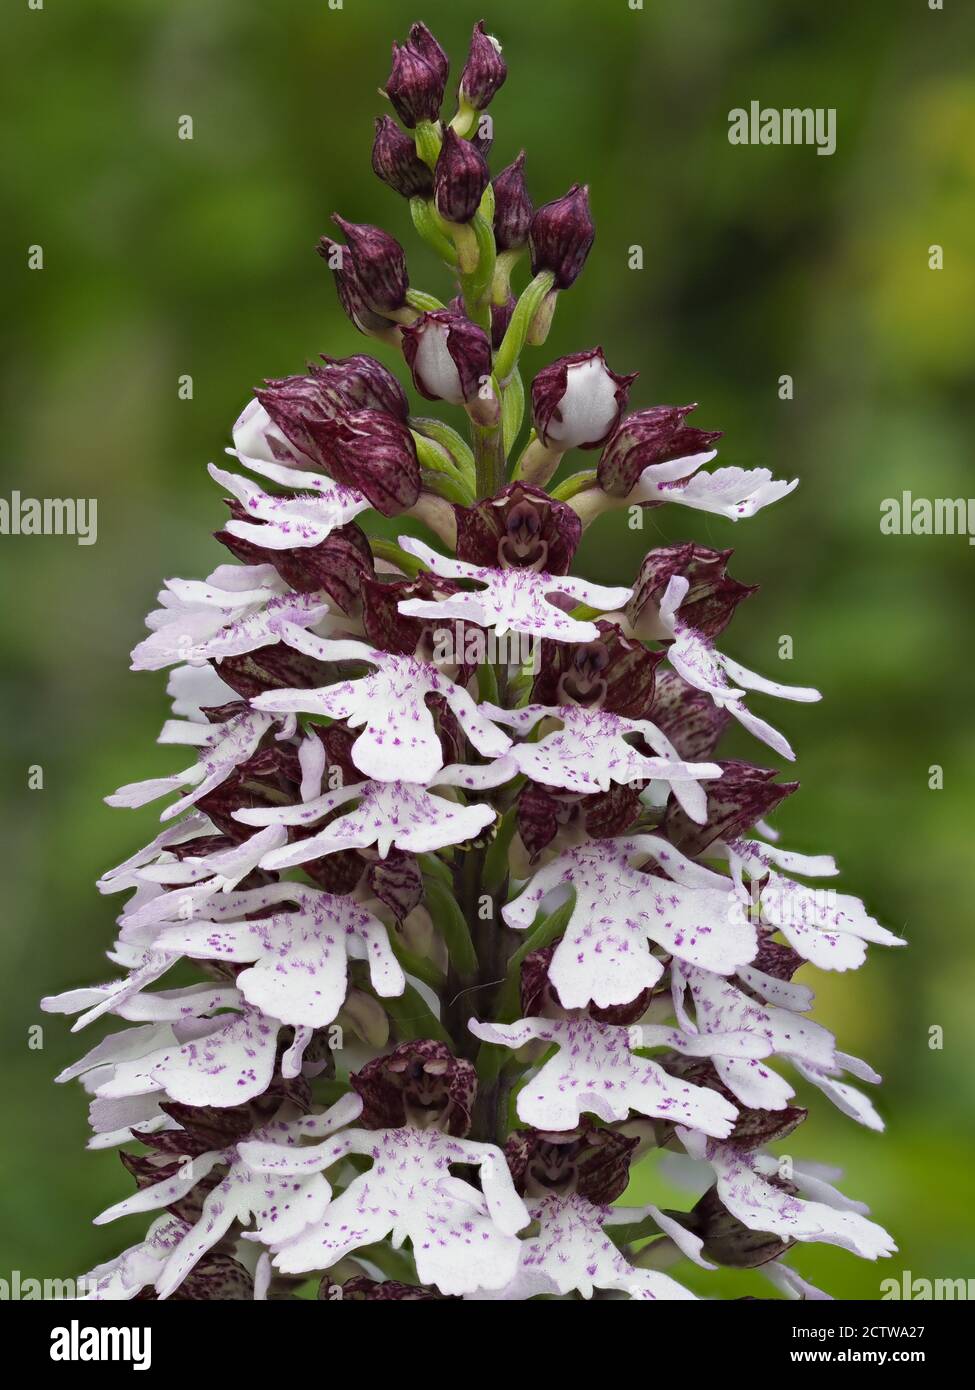 Lady Orchid (Orchis purpurea) in flower, Denge Woods, Bonsai Bank, Kent, UK, stacked focus image Stock Photo